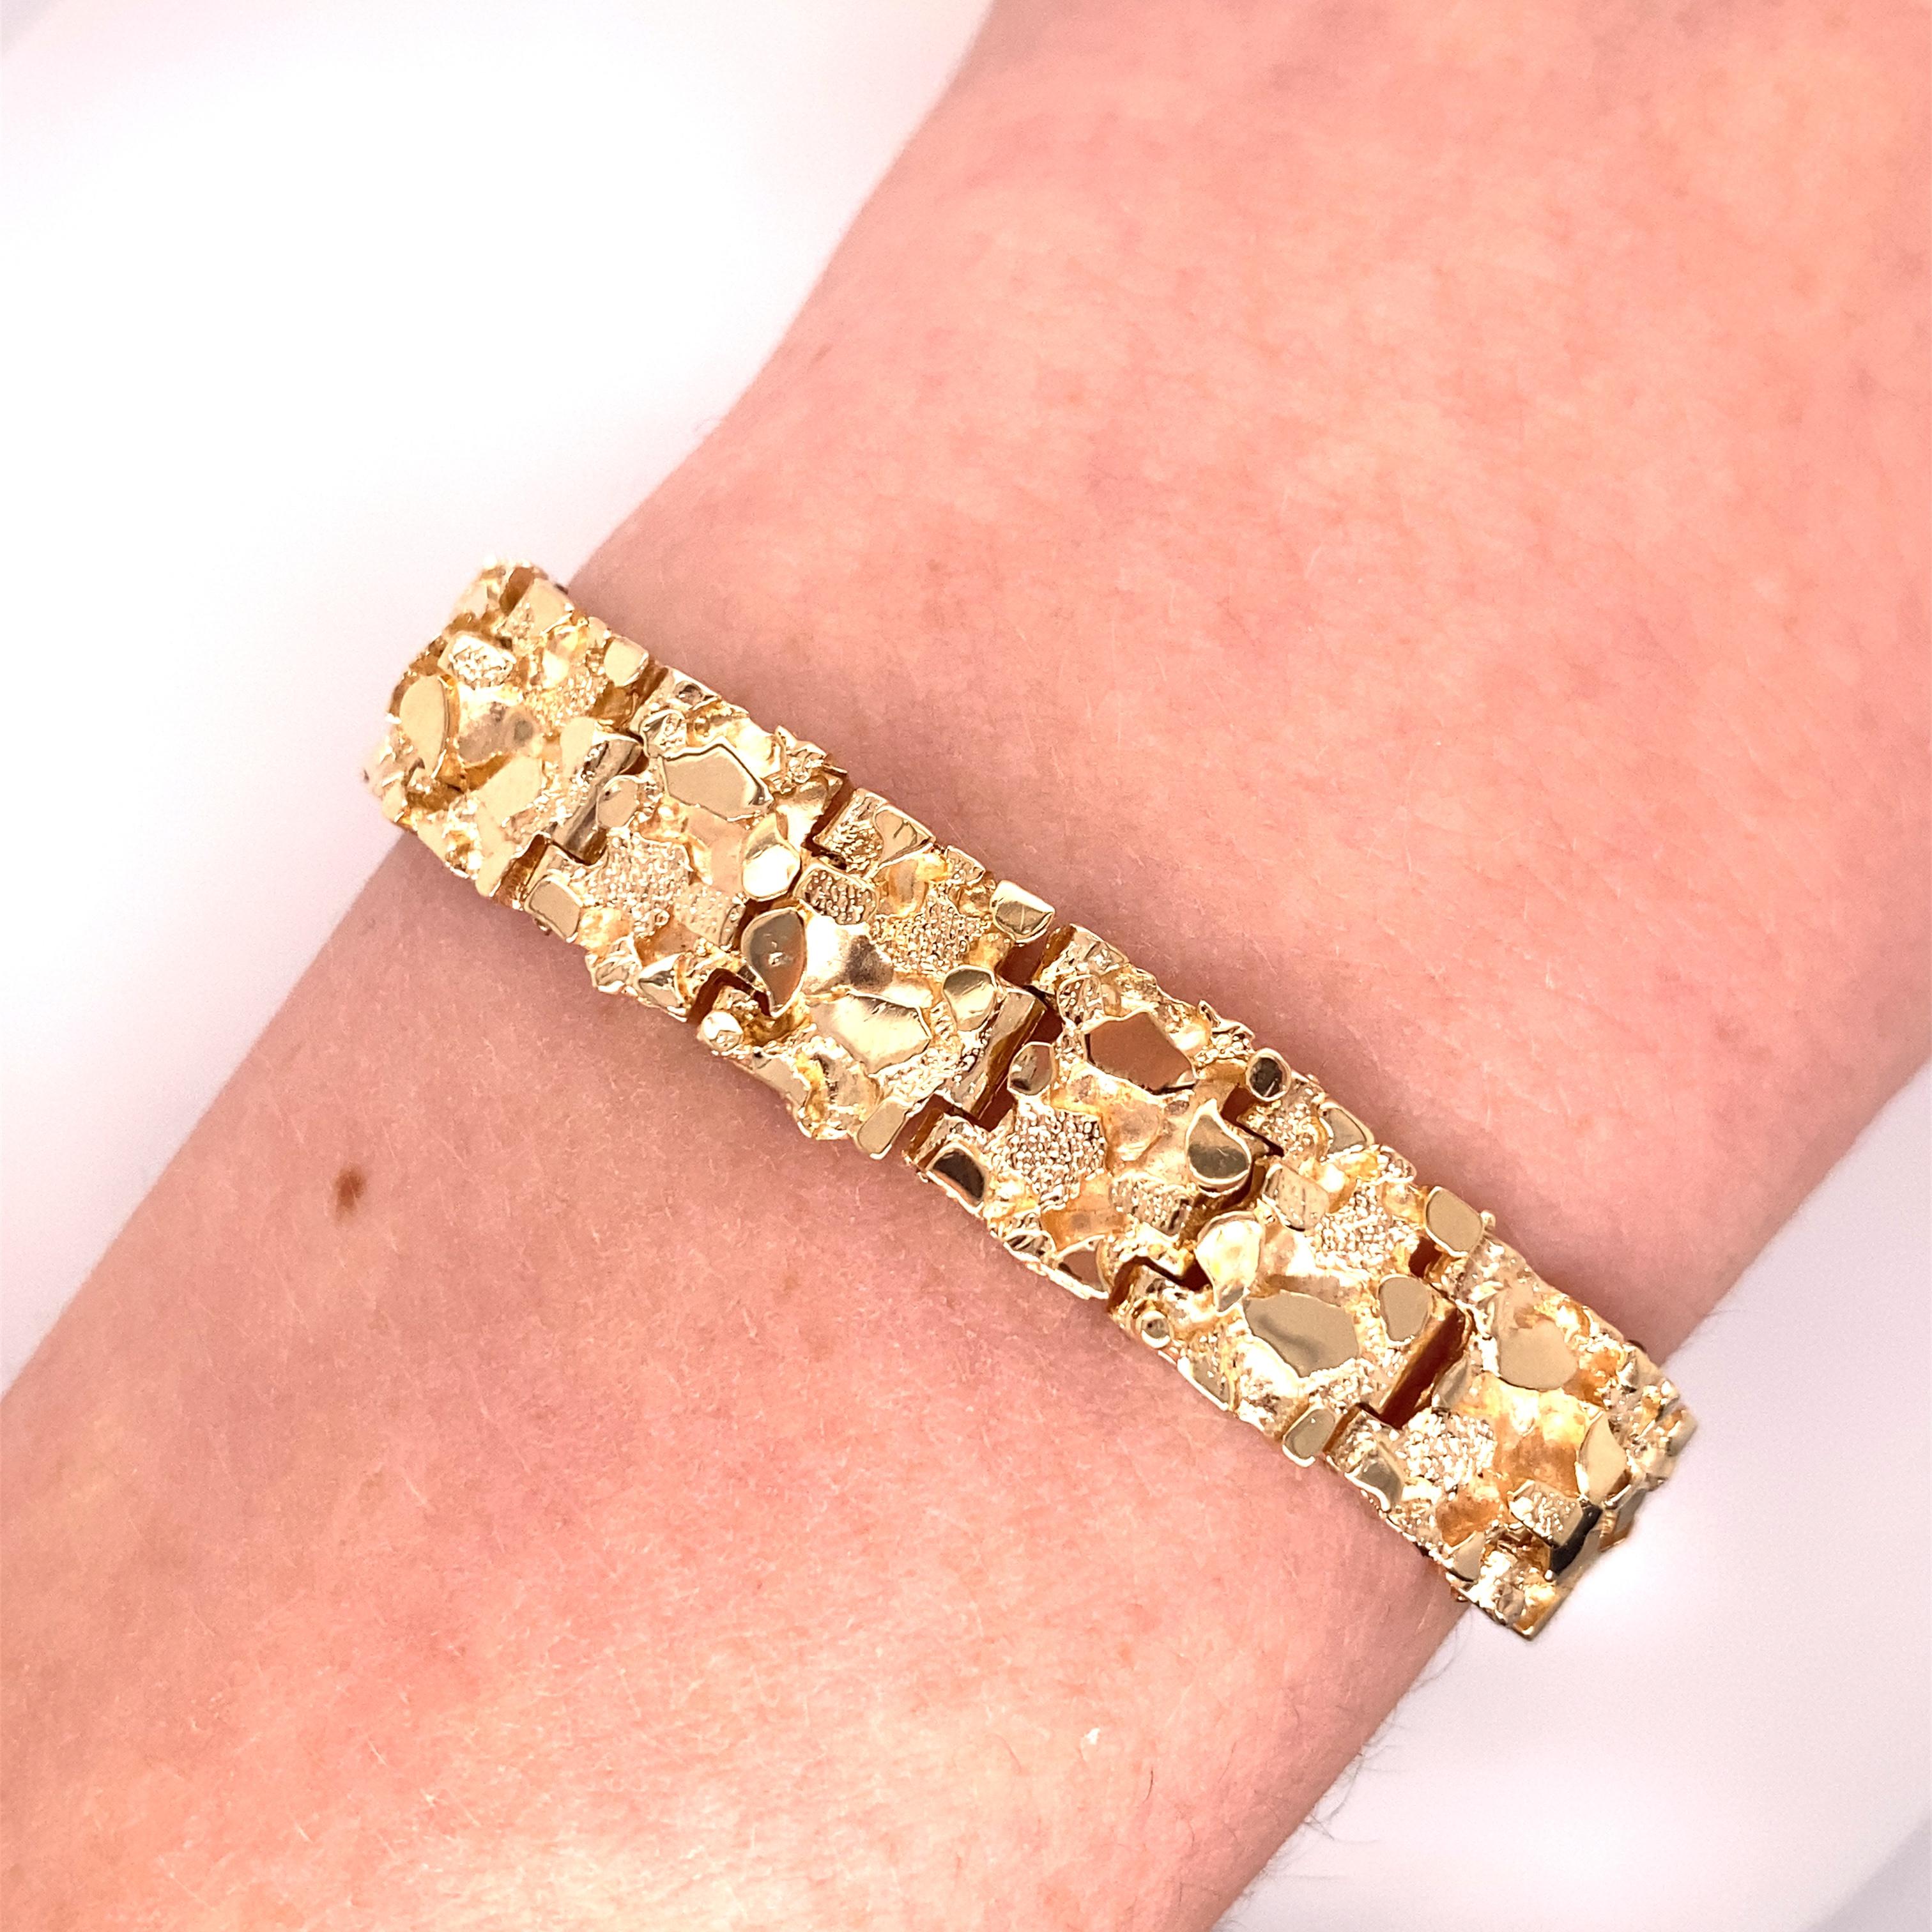 Vintage 1970's 14K Yellow Gold Nugget Bracelet - The bracelet measures .4 inches wide and 7 inches long. It has a plunger clasp with a figure 8 safety catch. The bracelet weighs 32 grams.